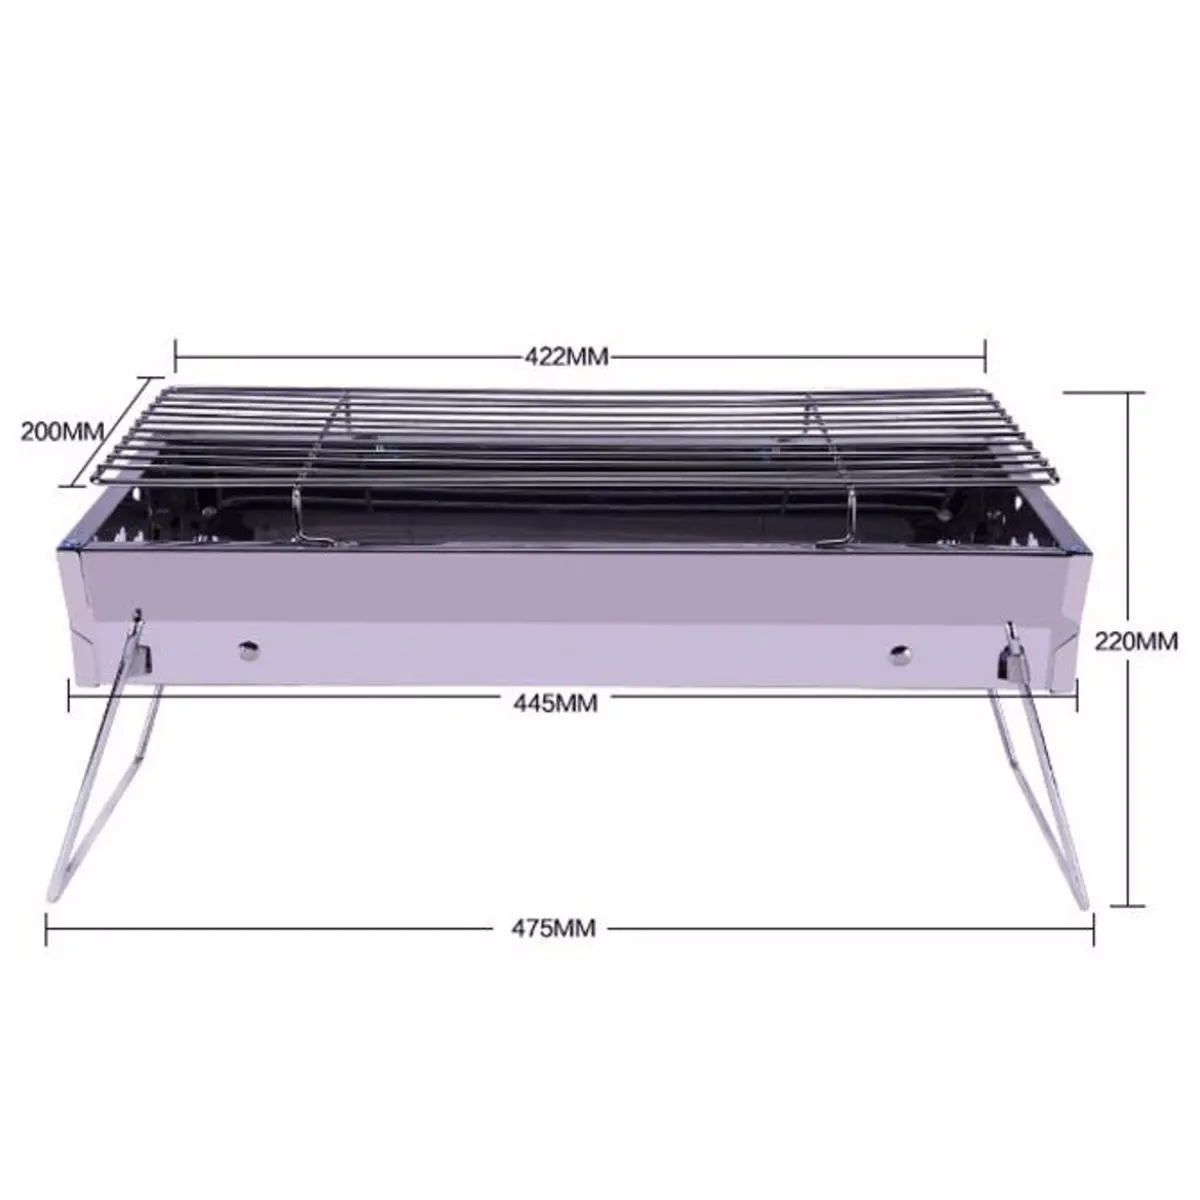 Stainless Steel Portable Outdooors Camping Table Top Barbecue Grill BBQ Cooking